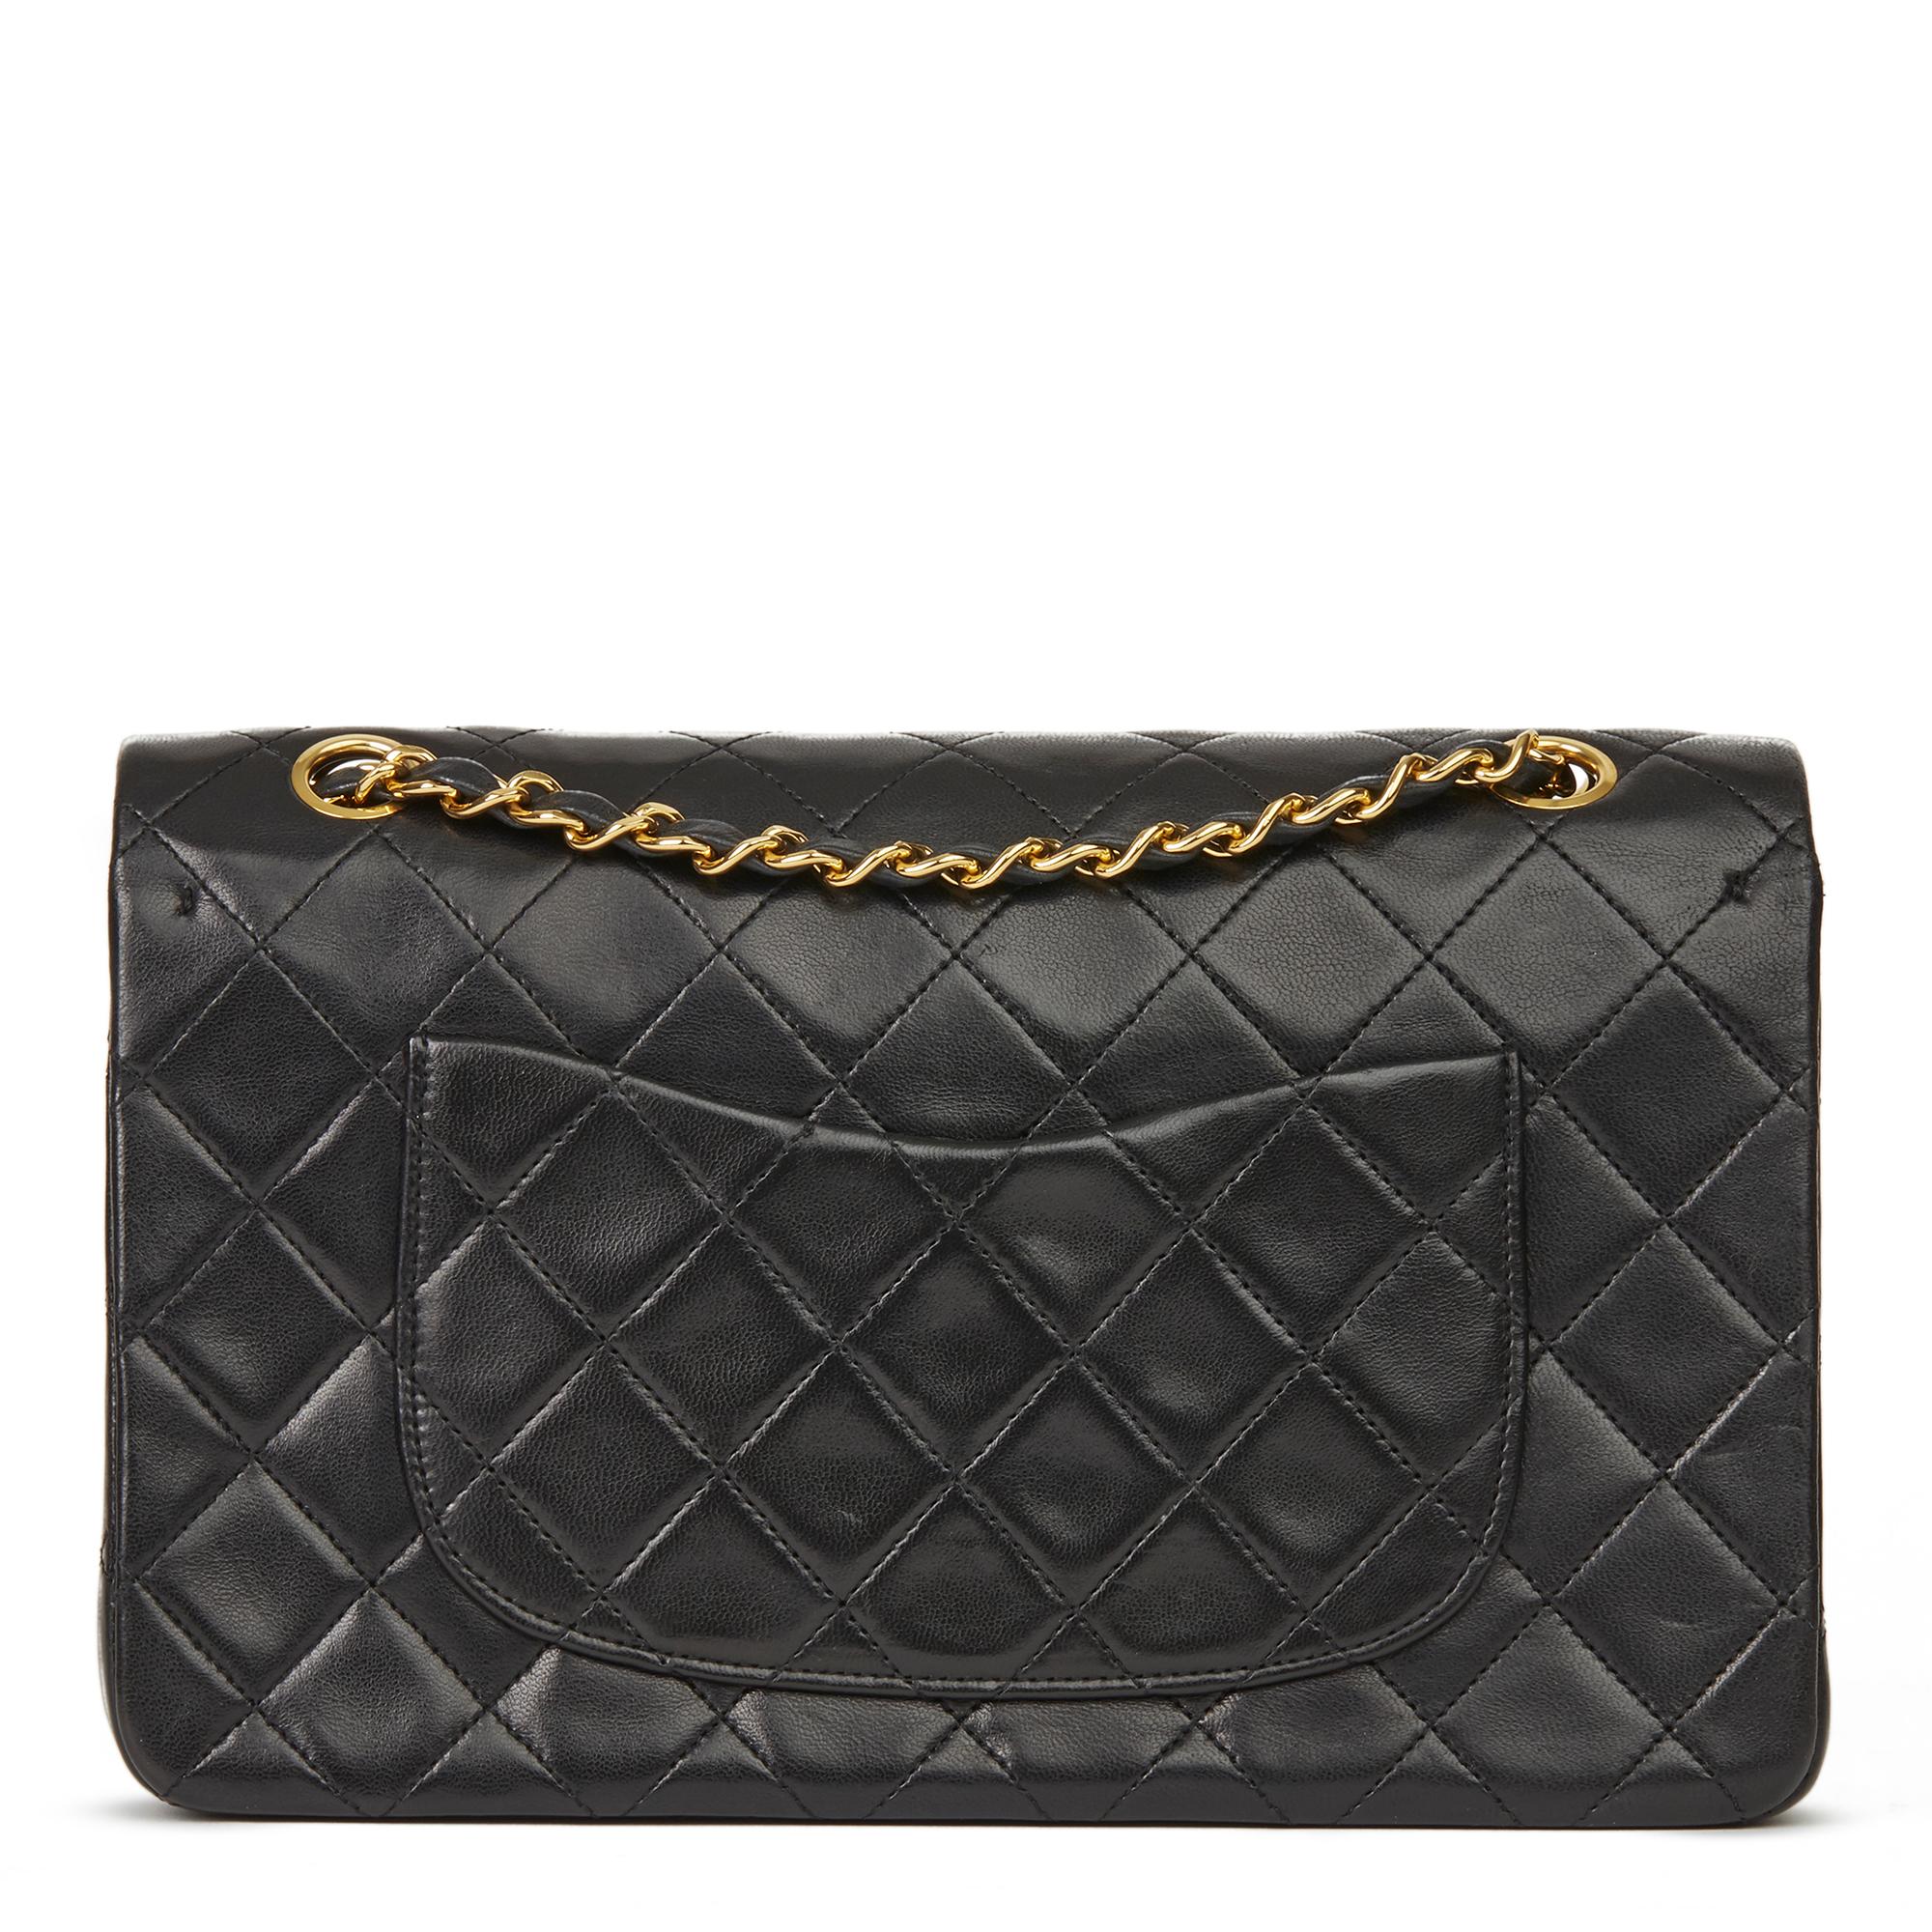 Women's 1989 Chanel Black Quilted Lambskin Vintage Medium Classic Double Flap Bag